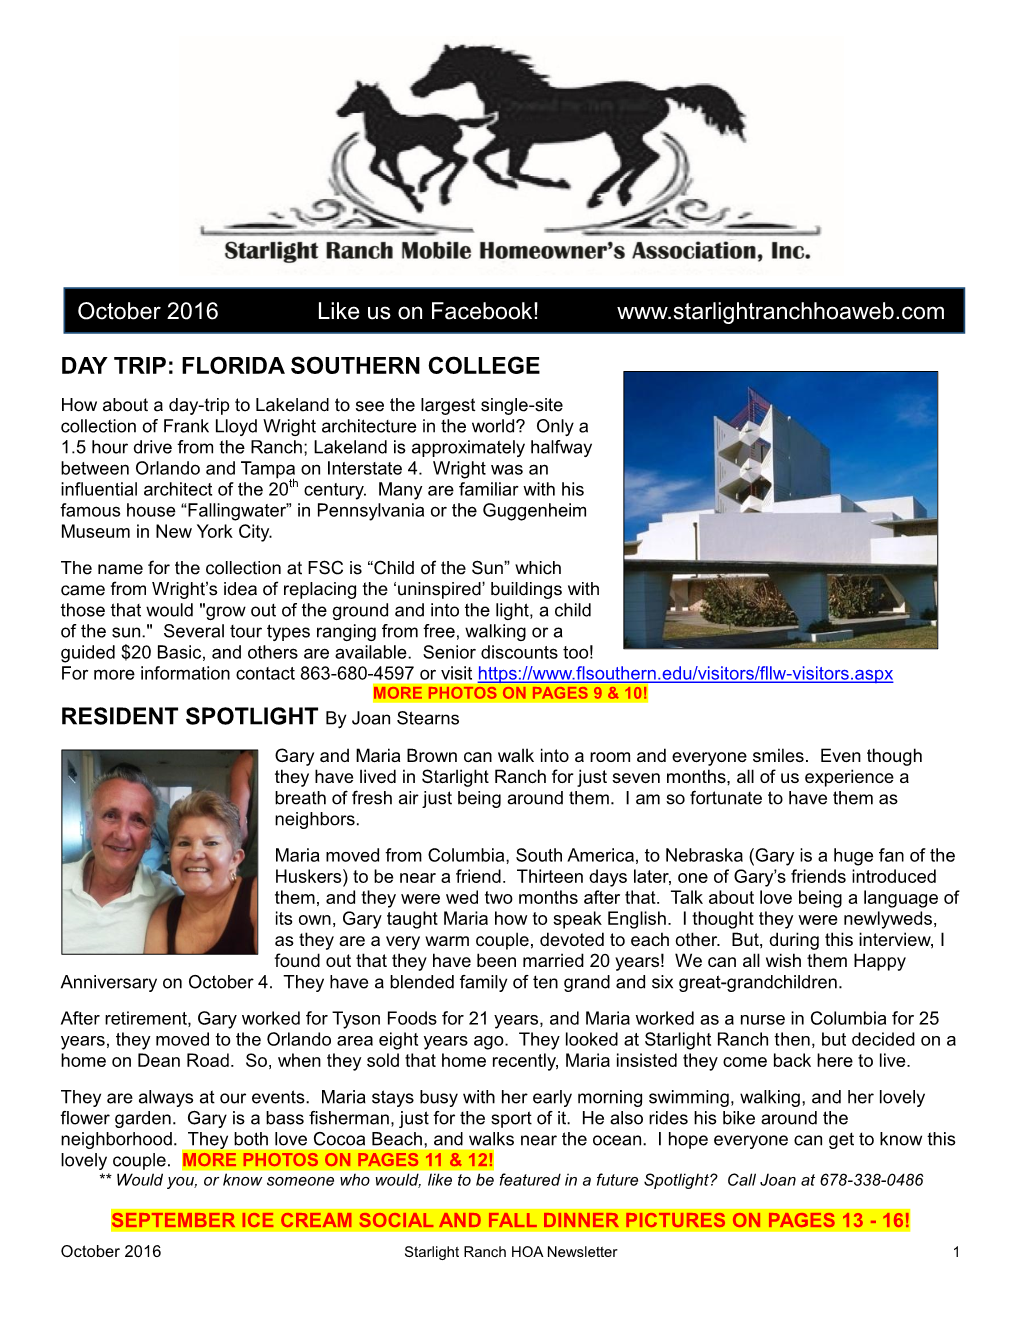 Day Trip: Florida Southern College Resident Spotlight